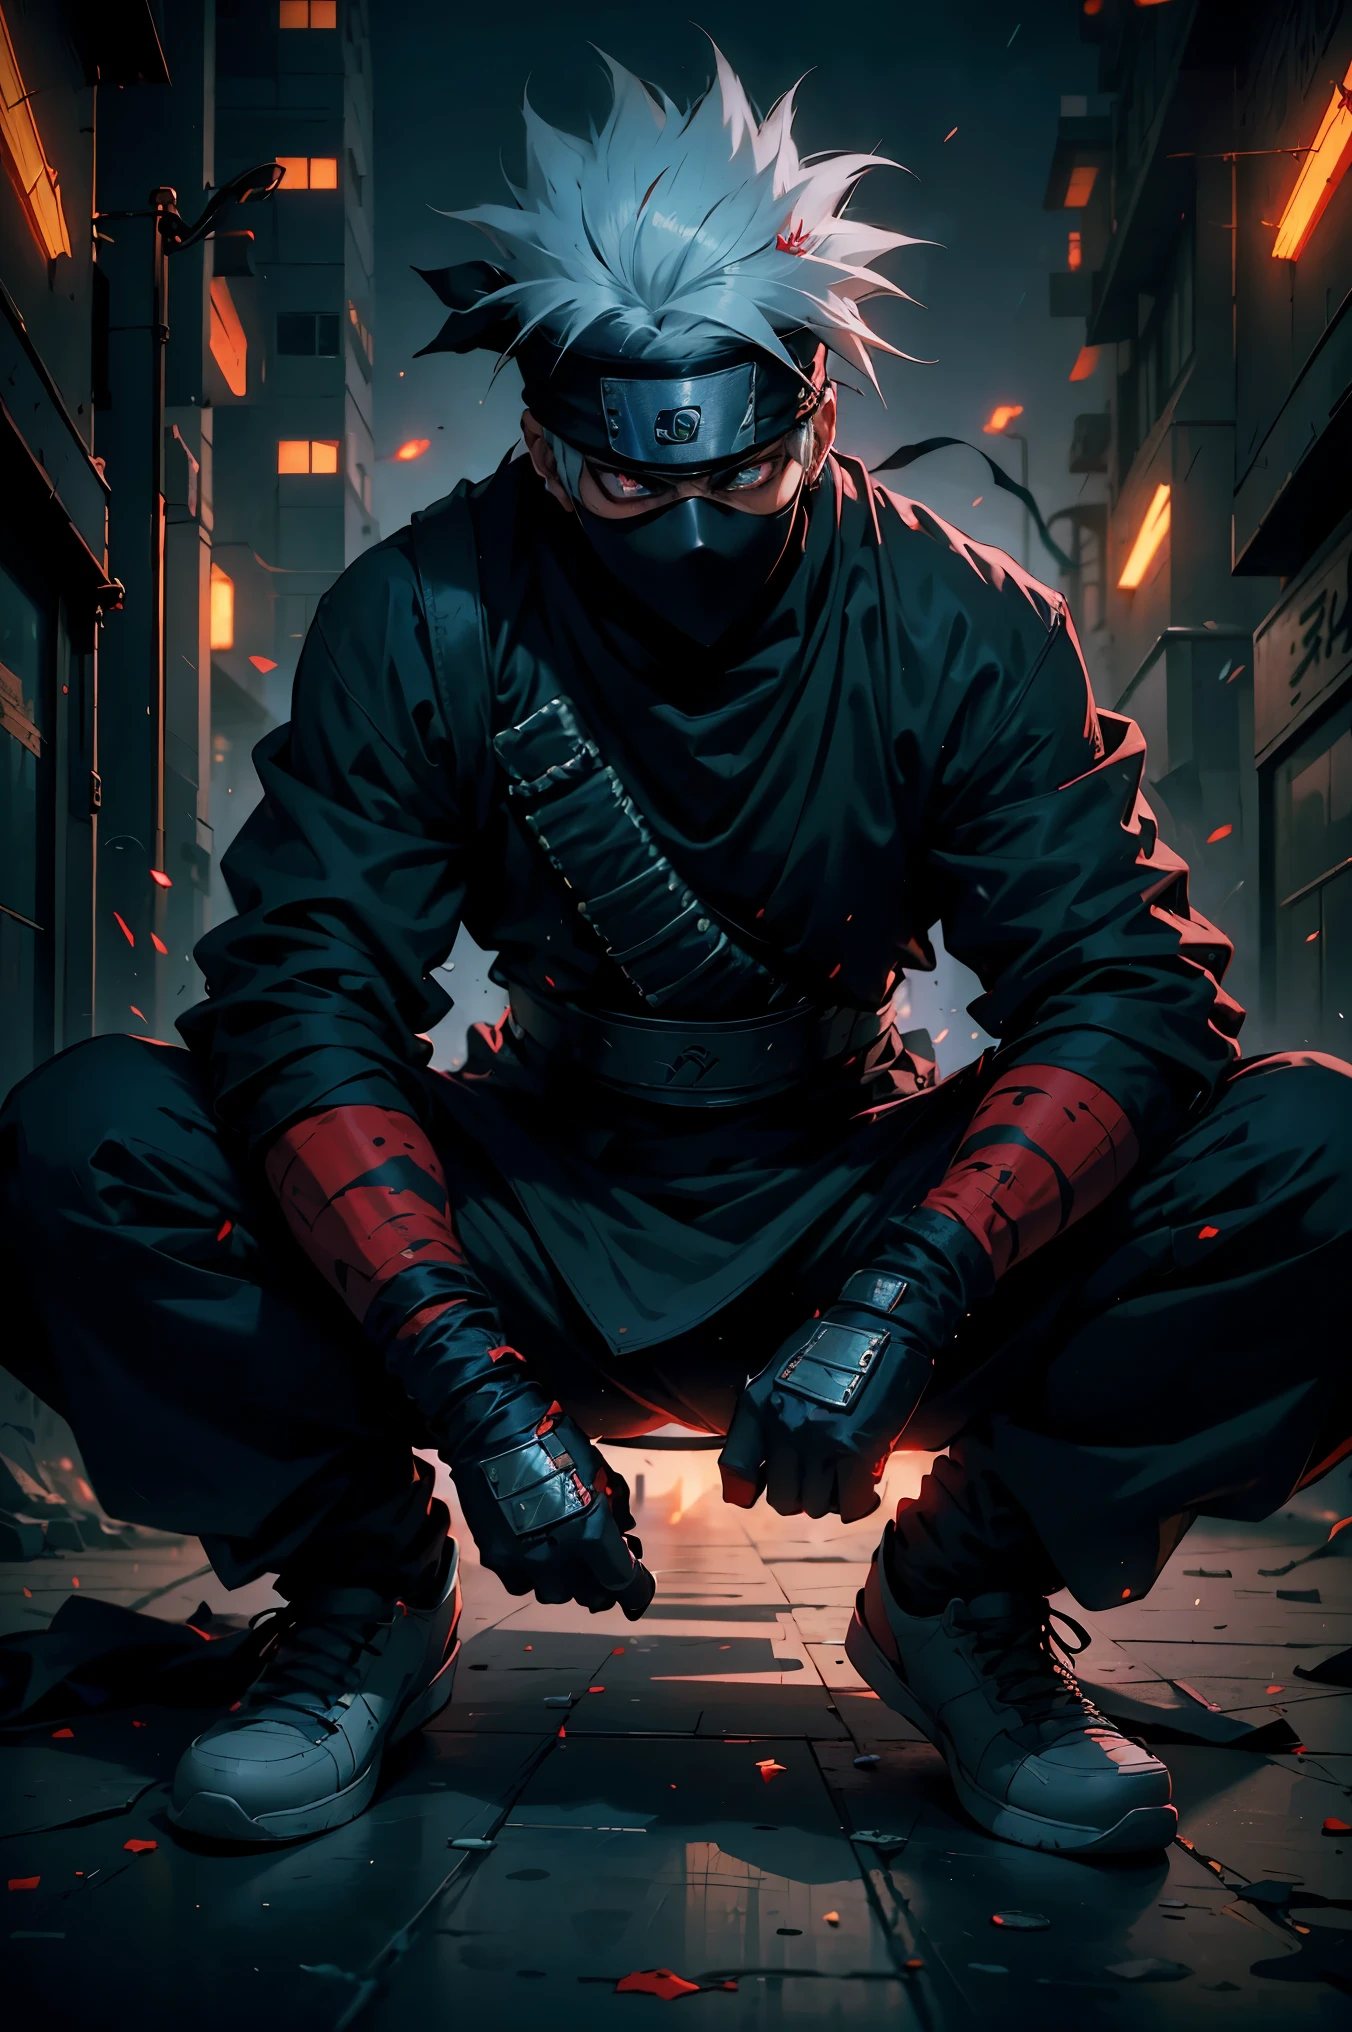 (best quality,4k,highres),Kakashi sitting on the ground with a street style, leaning against a wall, red Jordans, red ninja gloves, white hair, ninja headband, mask covering his mouth, graffiti background, vibrant colors, urban art style, edgy lighting,((ninja fantasmal))